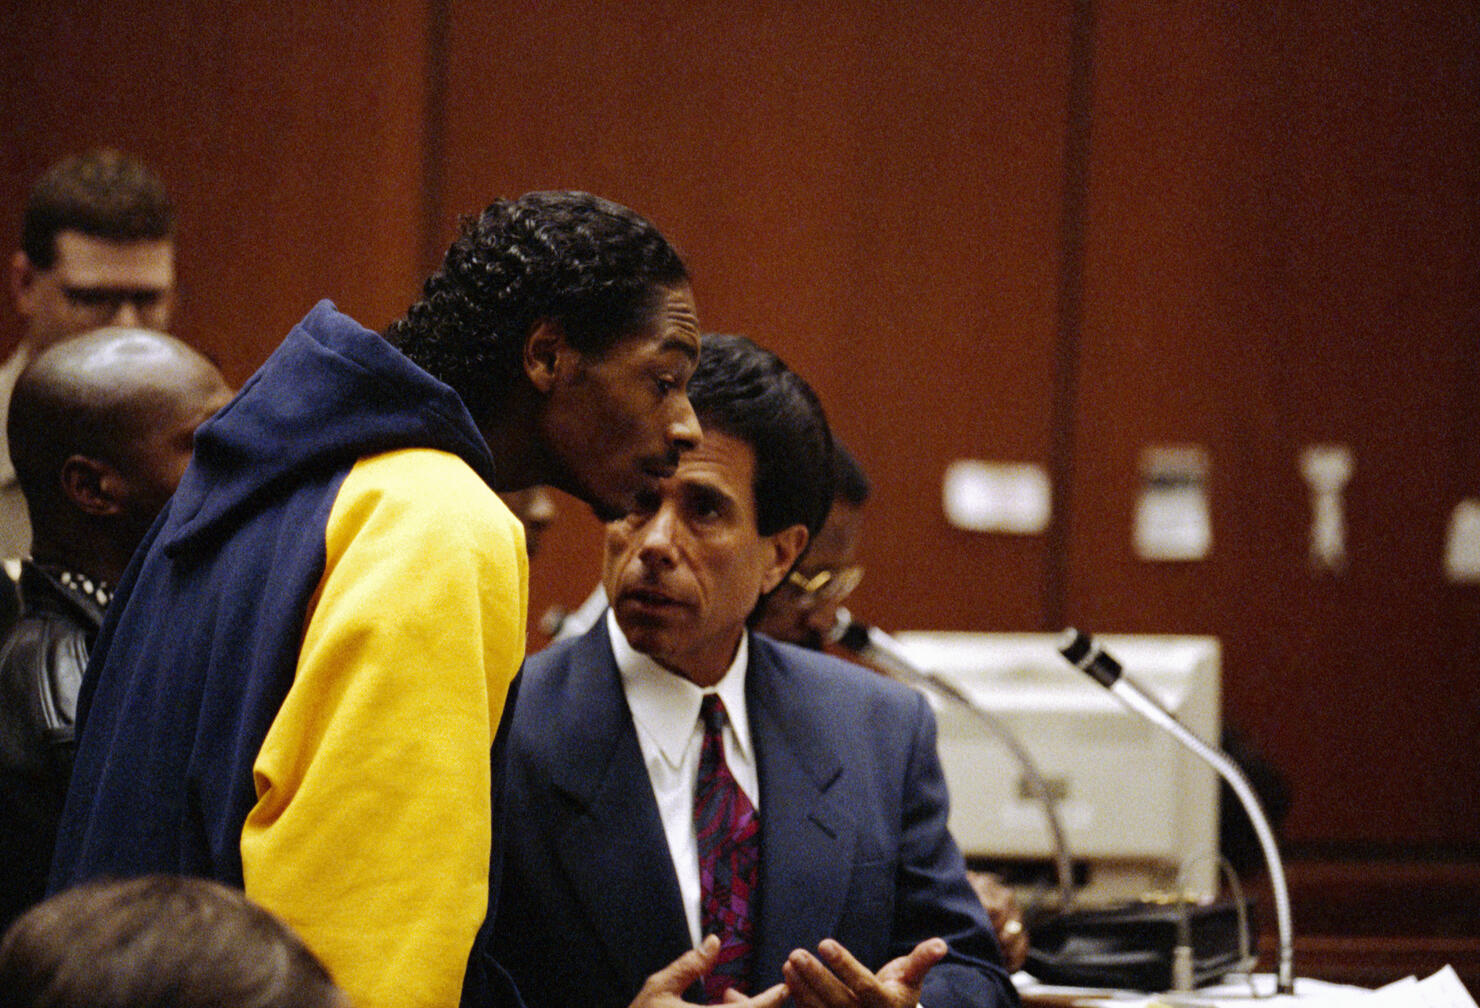 Snoop Dogg Talking with Attorney at Arraignment